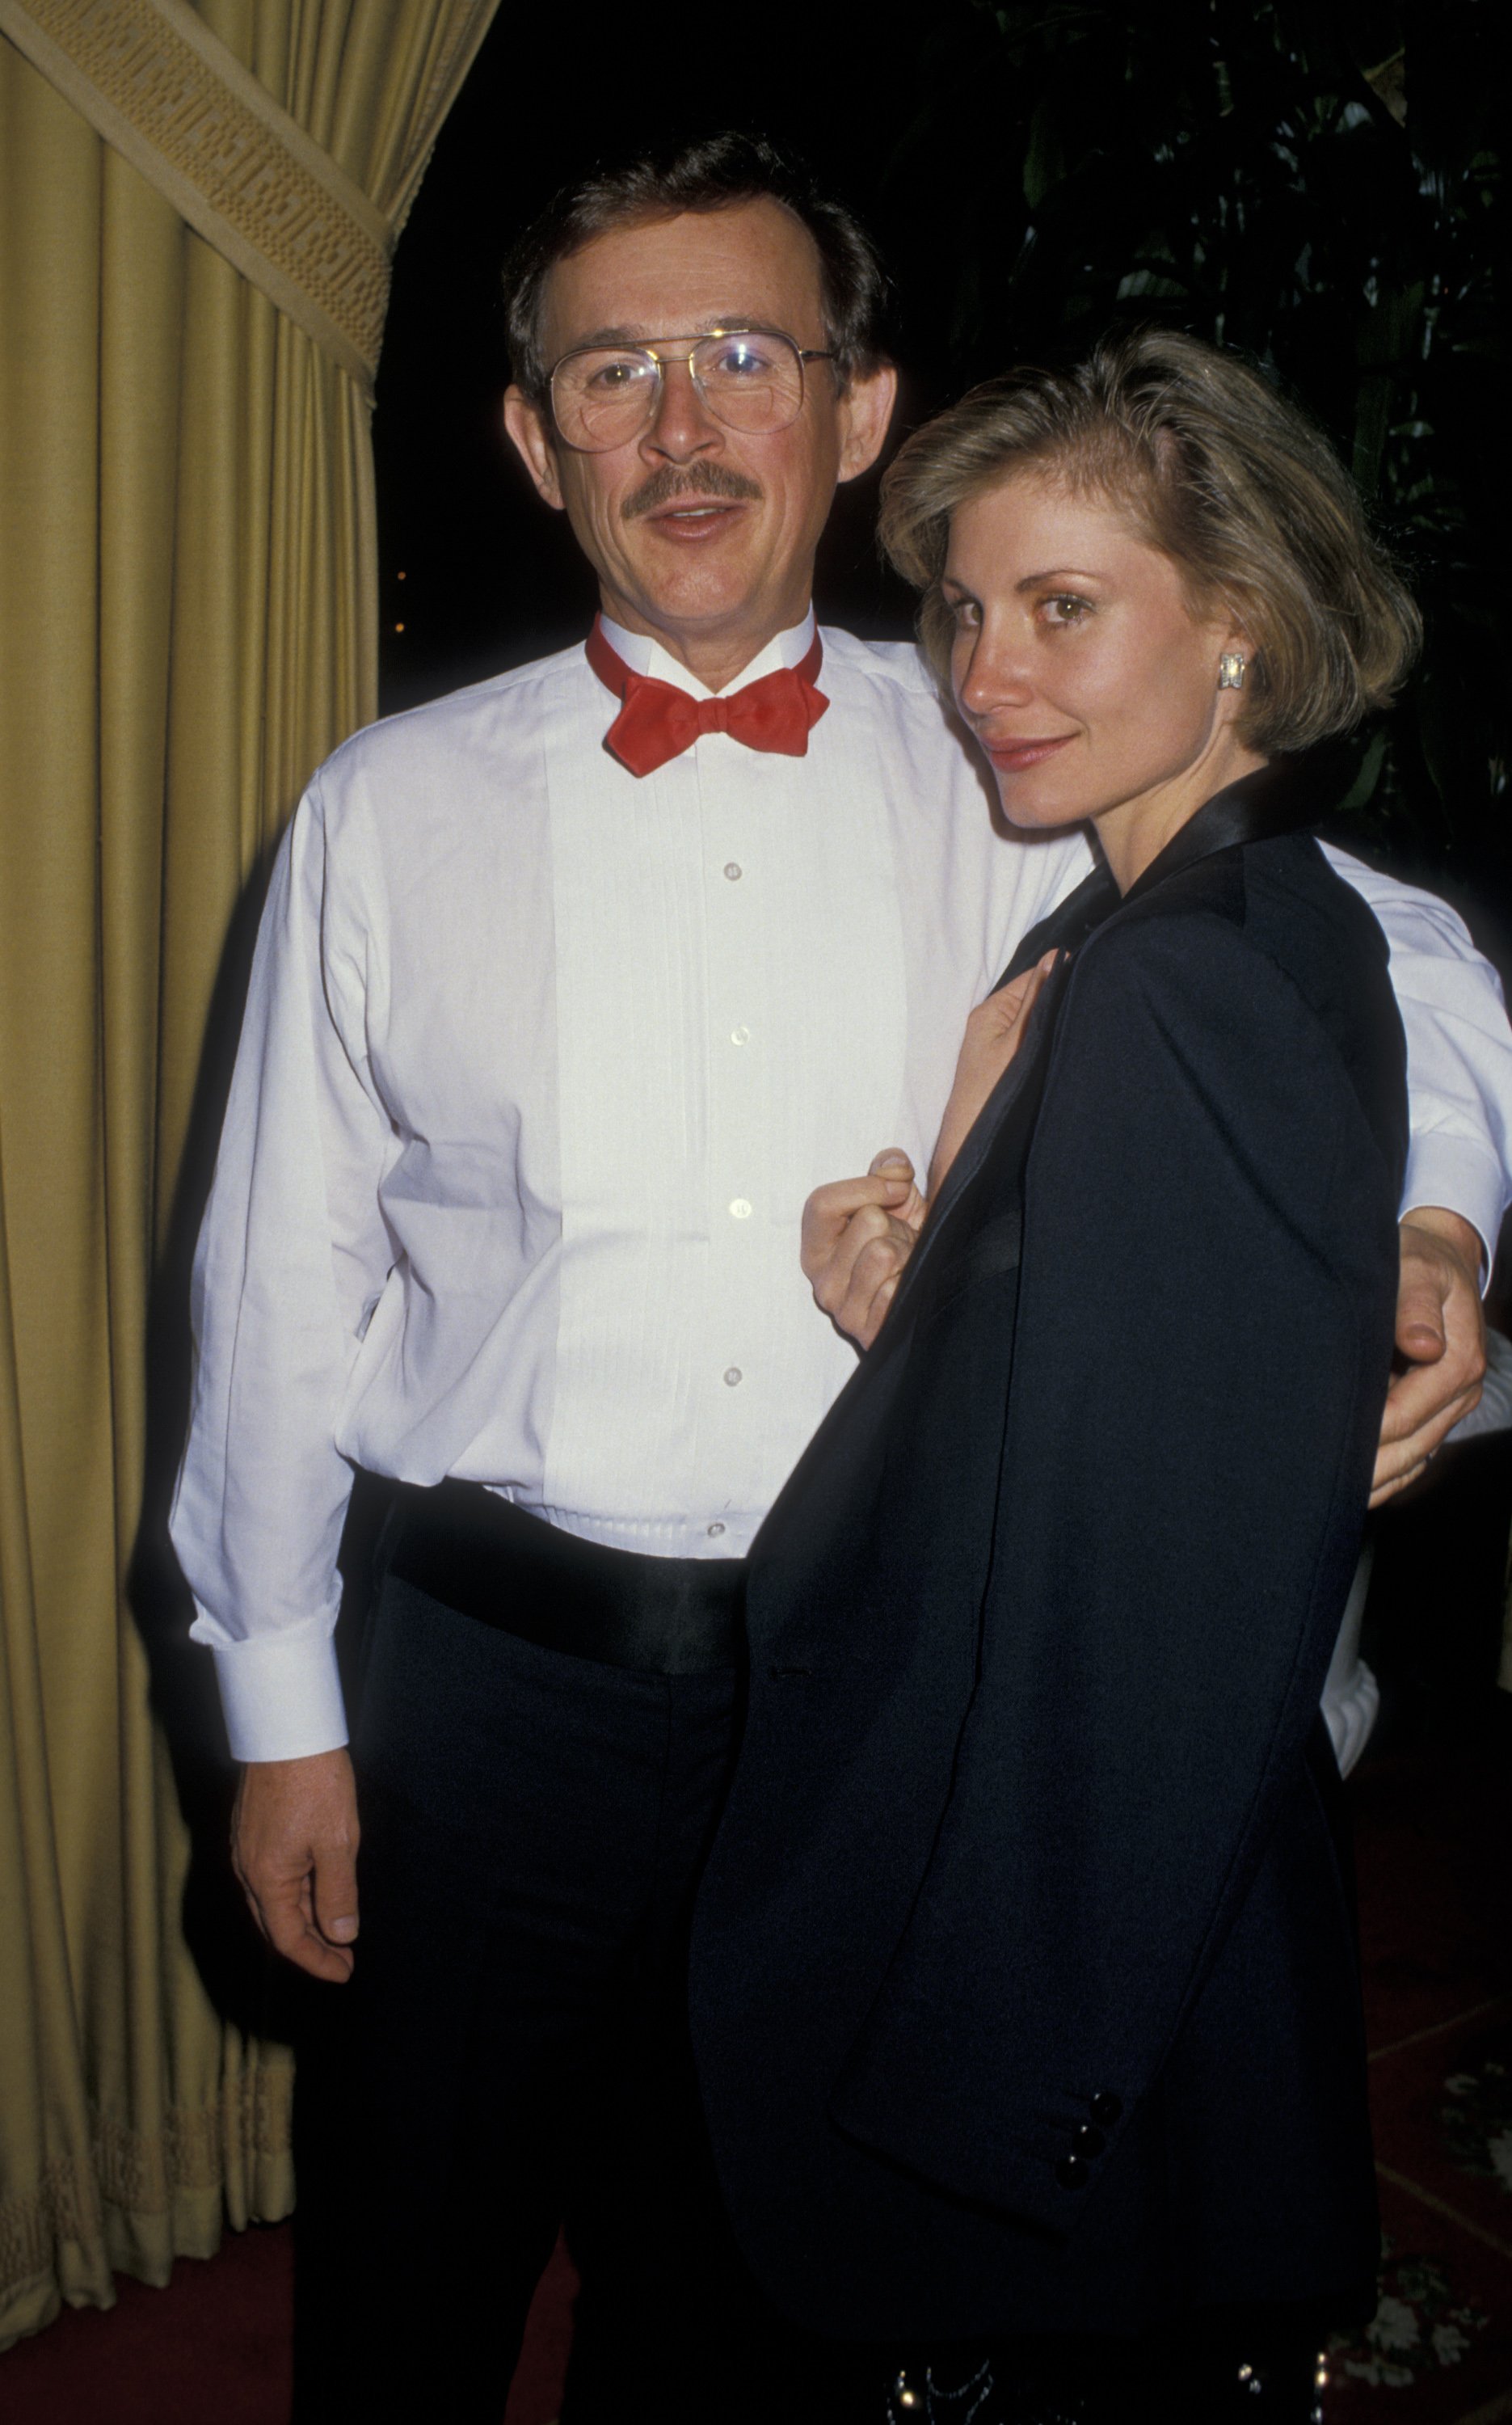  Dick Smothers and Lorraine Martin are pictured at the Entertainment Industry Council Dinner Honoring Bud Grant at the Beverly Wilshire Hotel on November 24, 1987, in Beverly Hills, California | Source: Getty Images